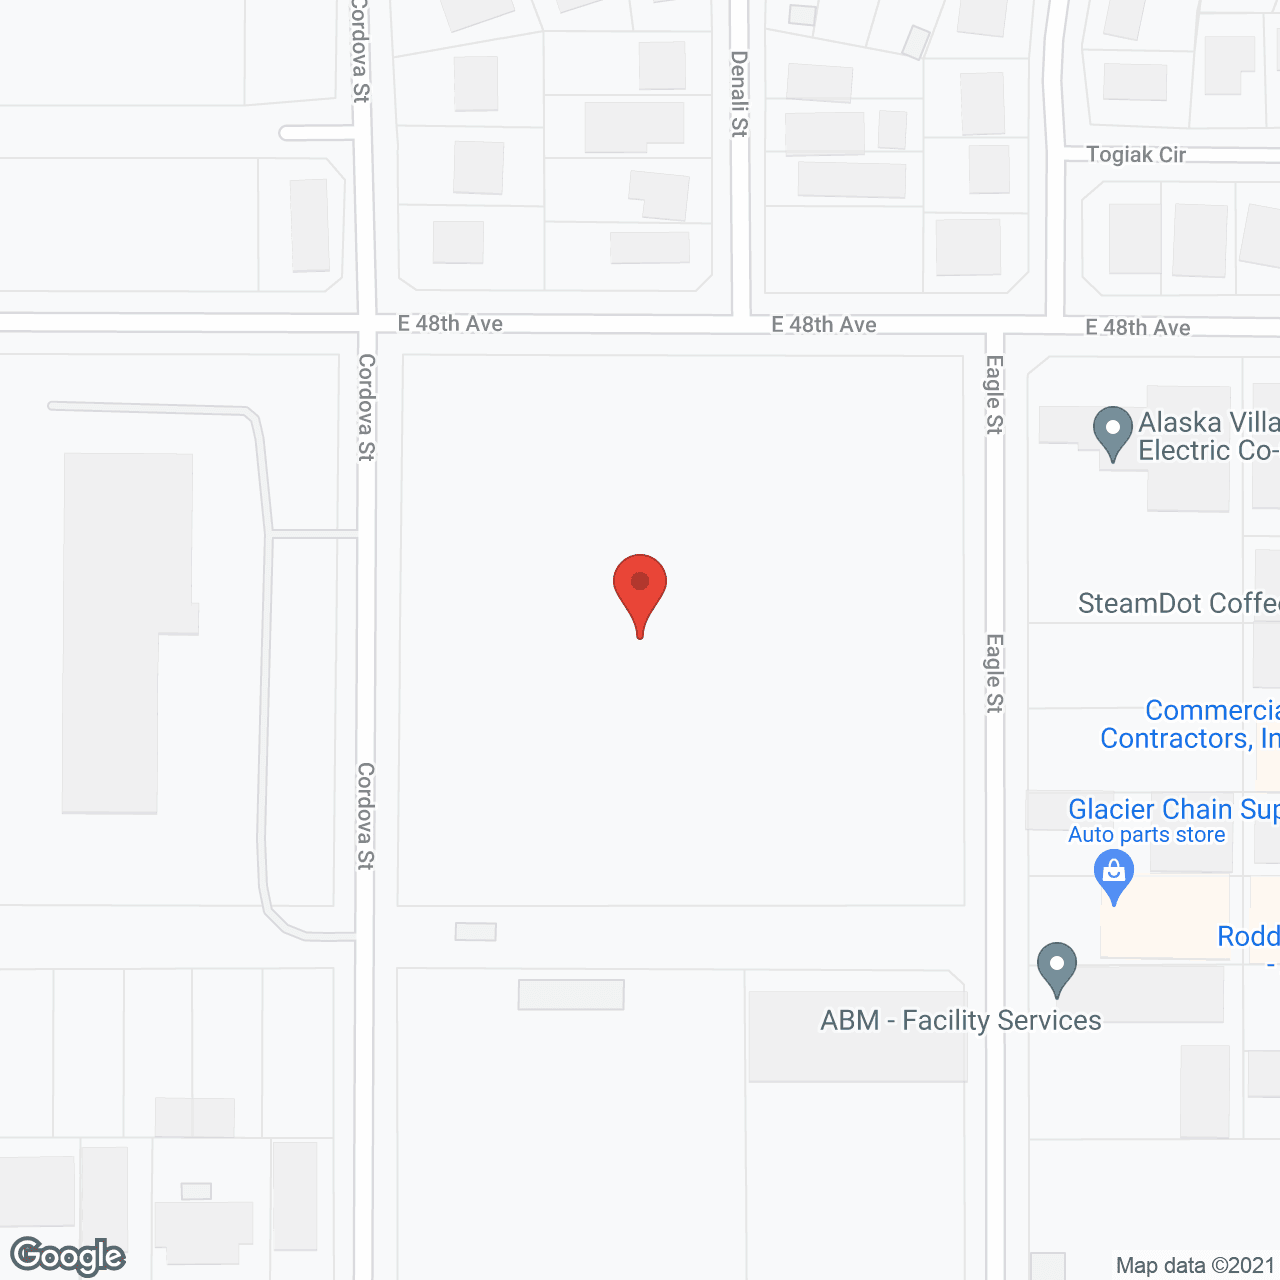 Providence Extended Care Ctr in google map